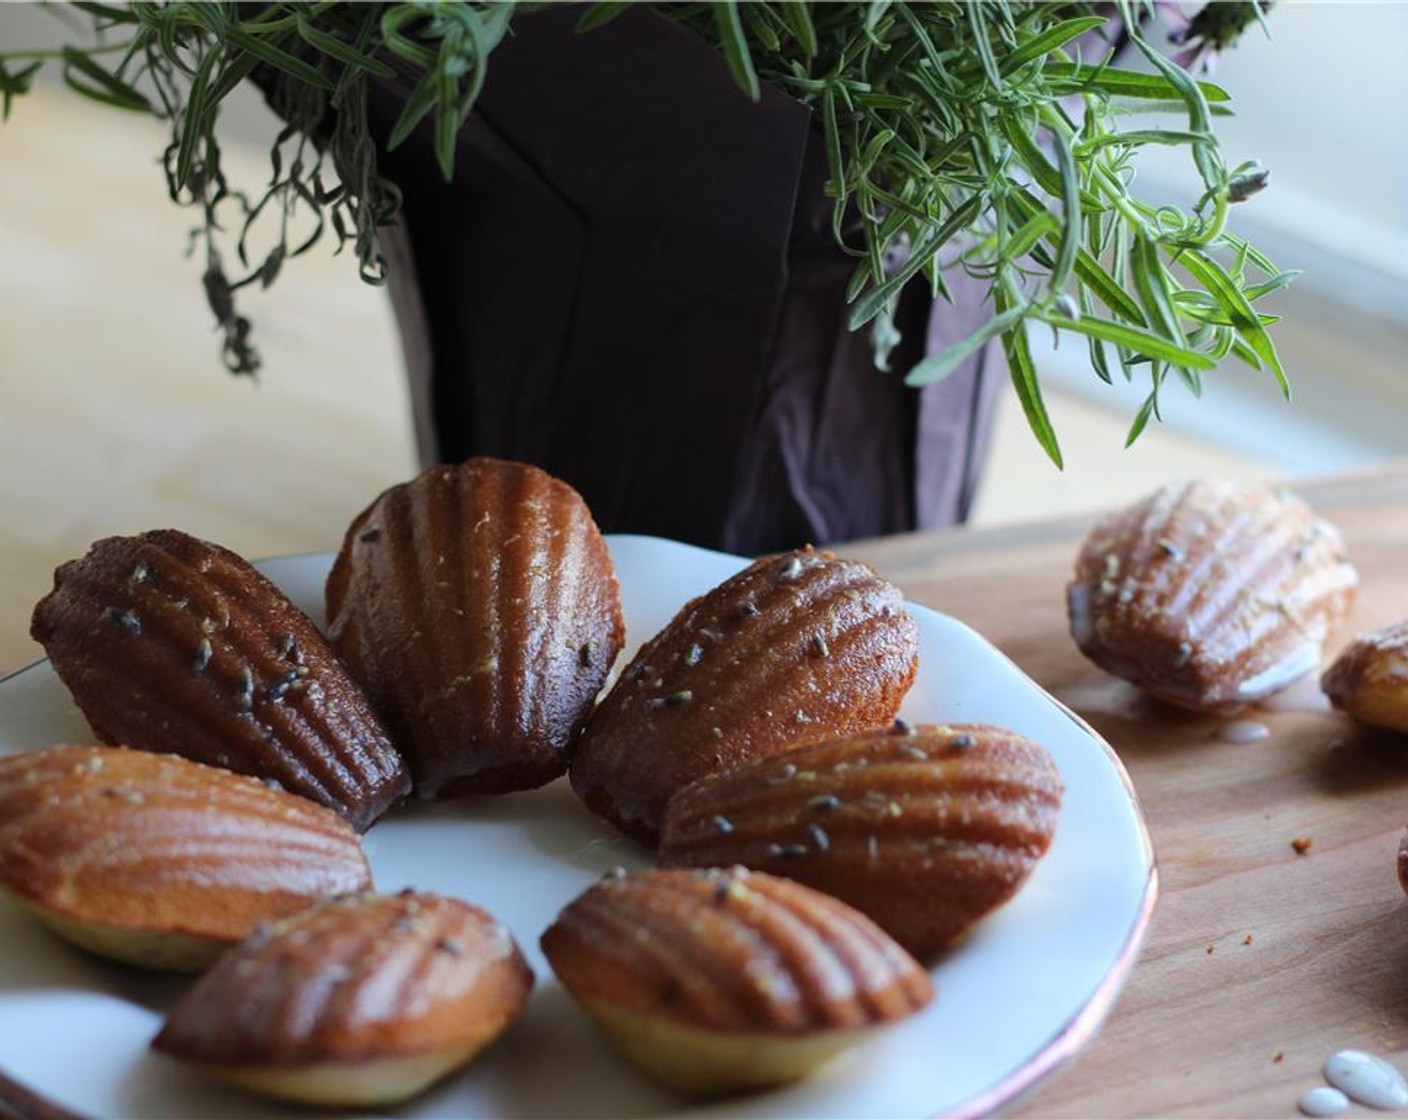 step 10 When the madeleines are cool, gently dip the front sides into the glaze and return to the wire rack to firm. Serve immediately or store in an airtight container on the counter for up to two days.